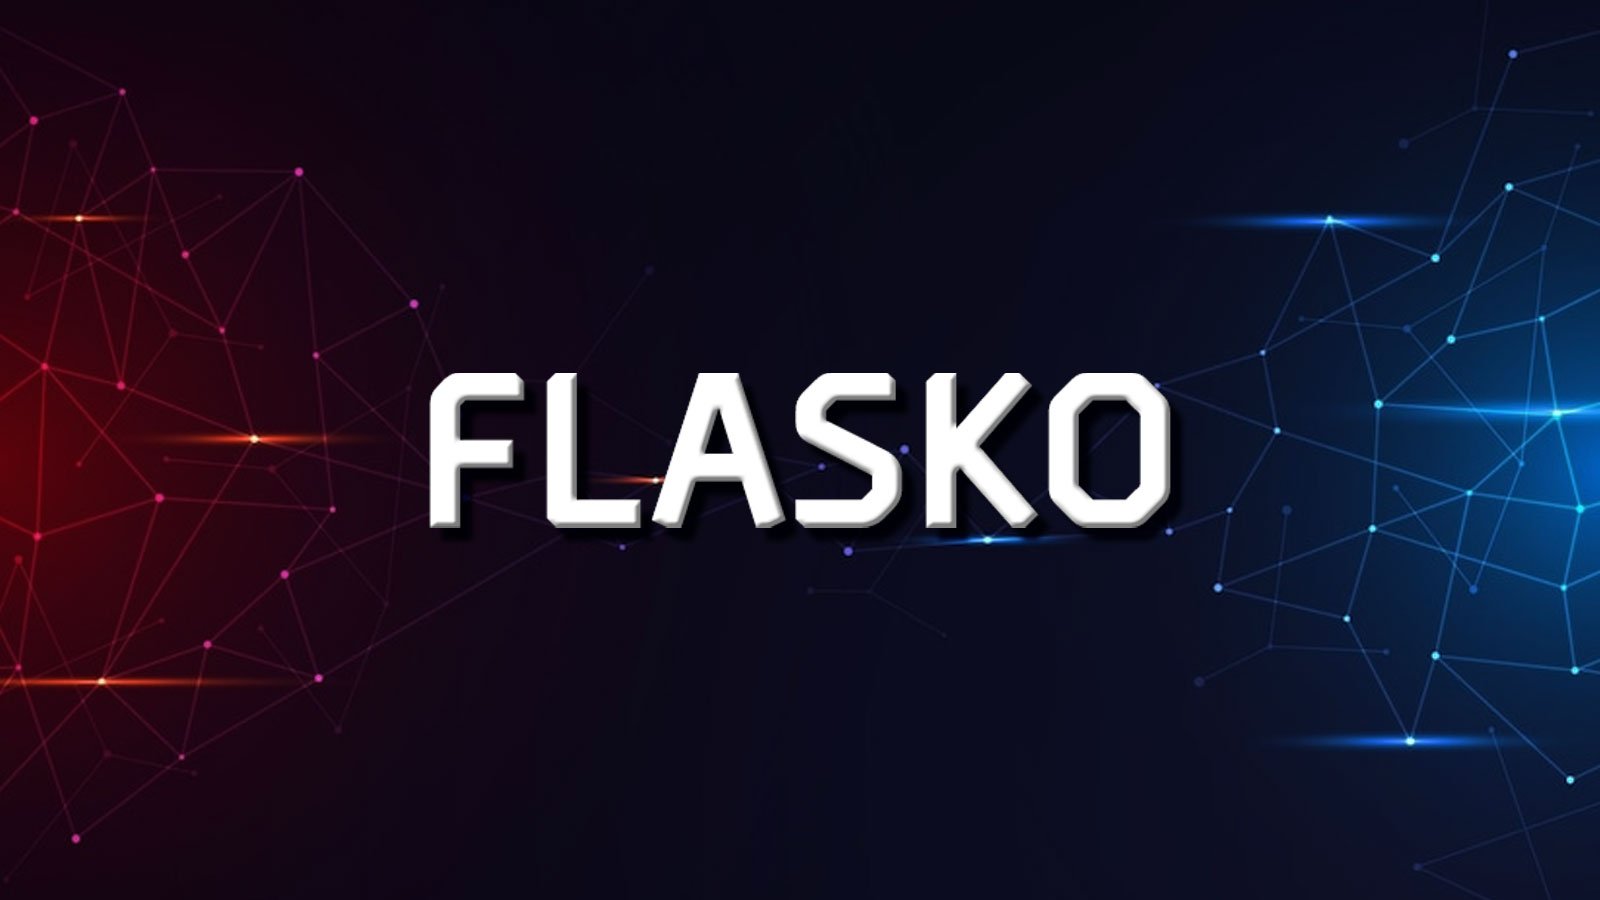 Solana (SOL) and Dogecoin (DOGE) Showing Volatility Increase, Flasko (FLSK) Conducts Pre-Sale